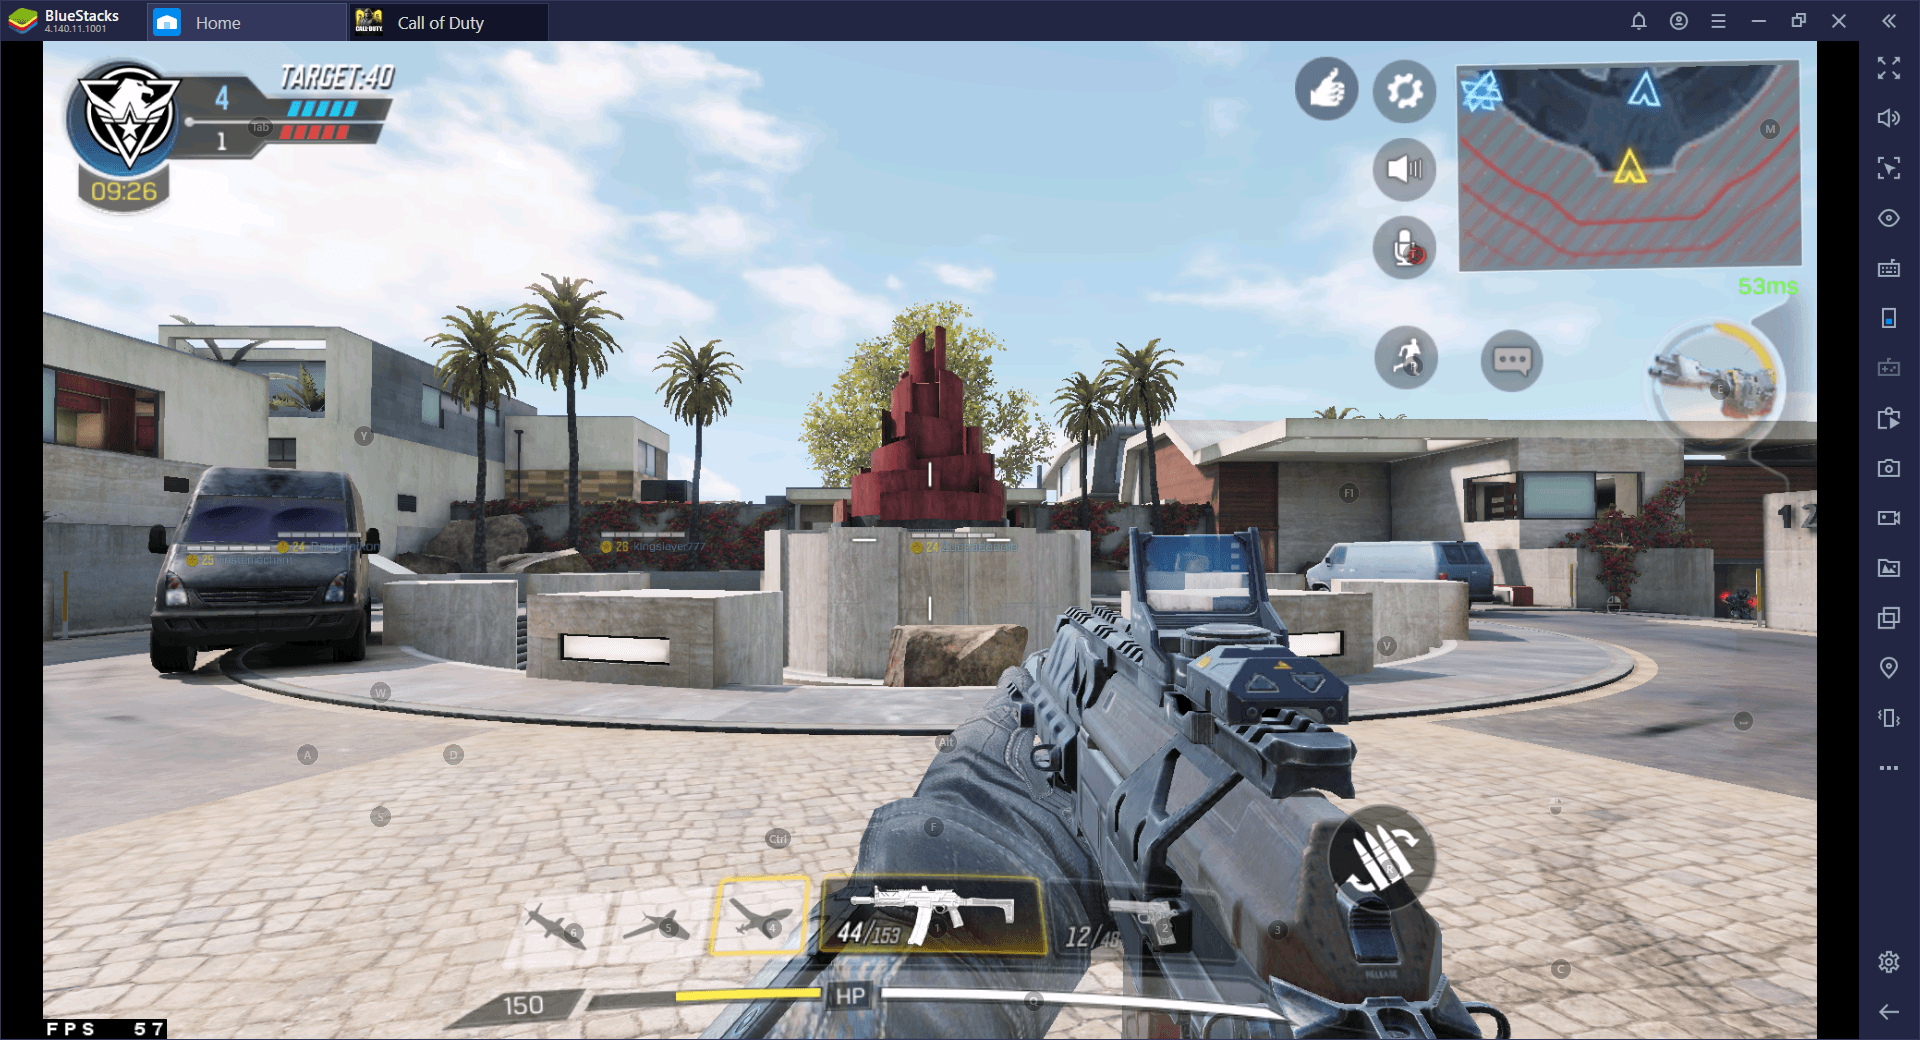 Latest on Call of Duty Mobile with BlueStacks – Smart ... - 